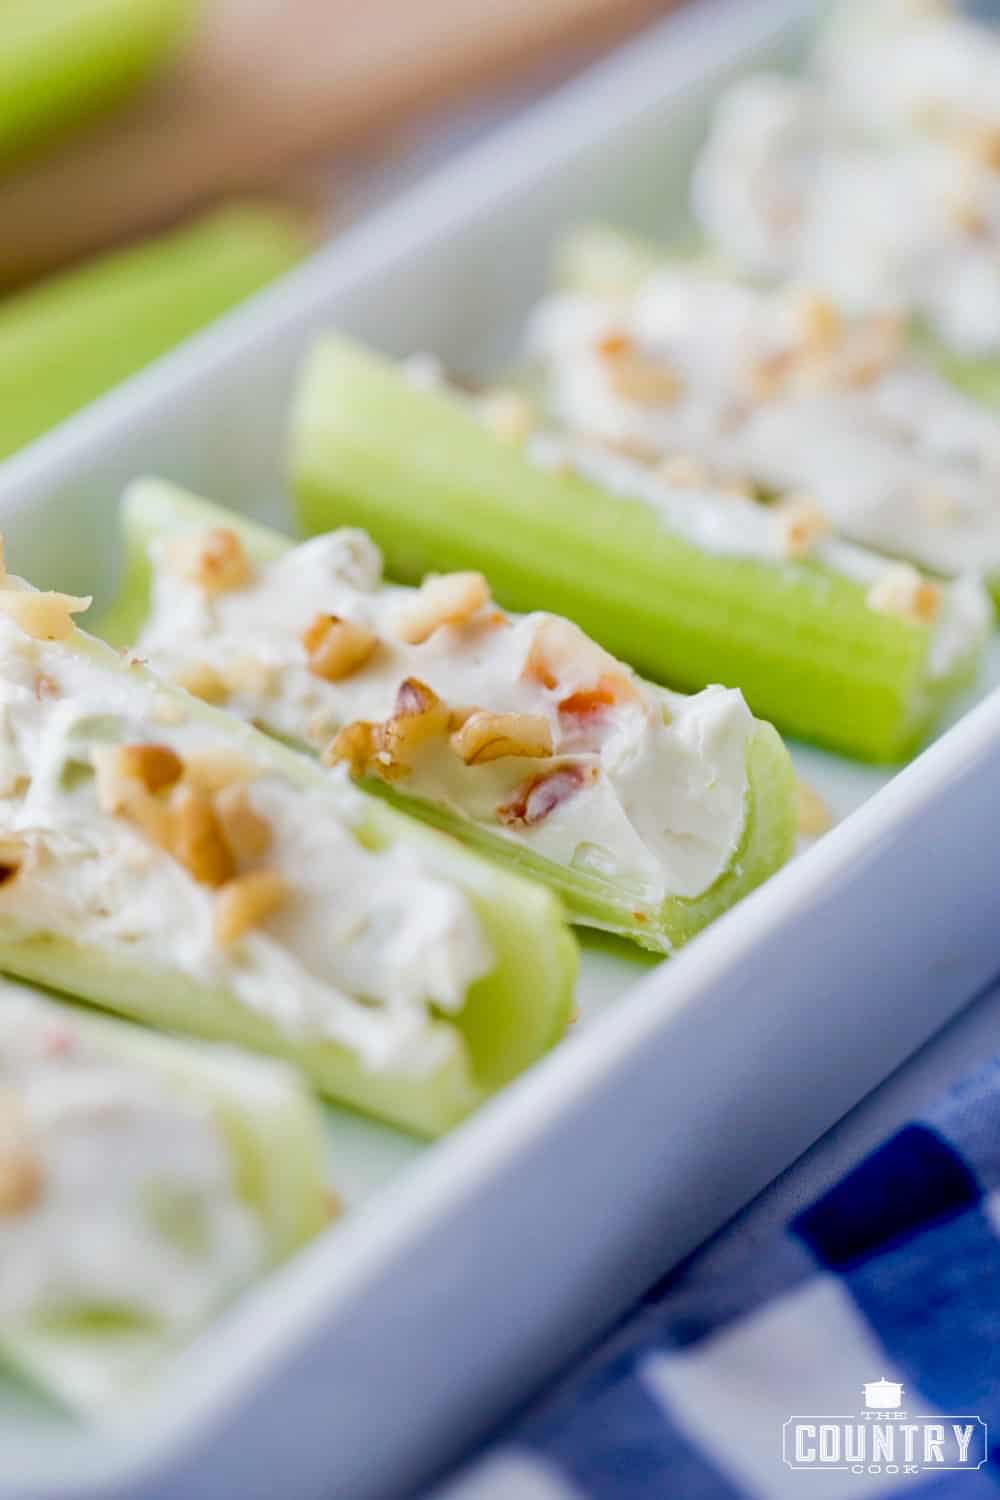 Celery stuffed with cream cheese and topped with chopped walnuts. Closeup photo.